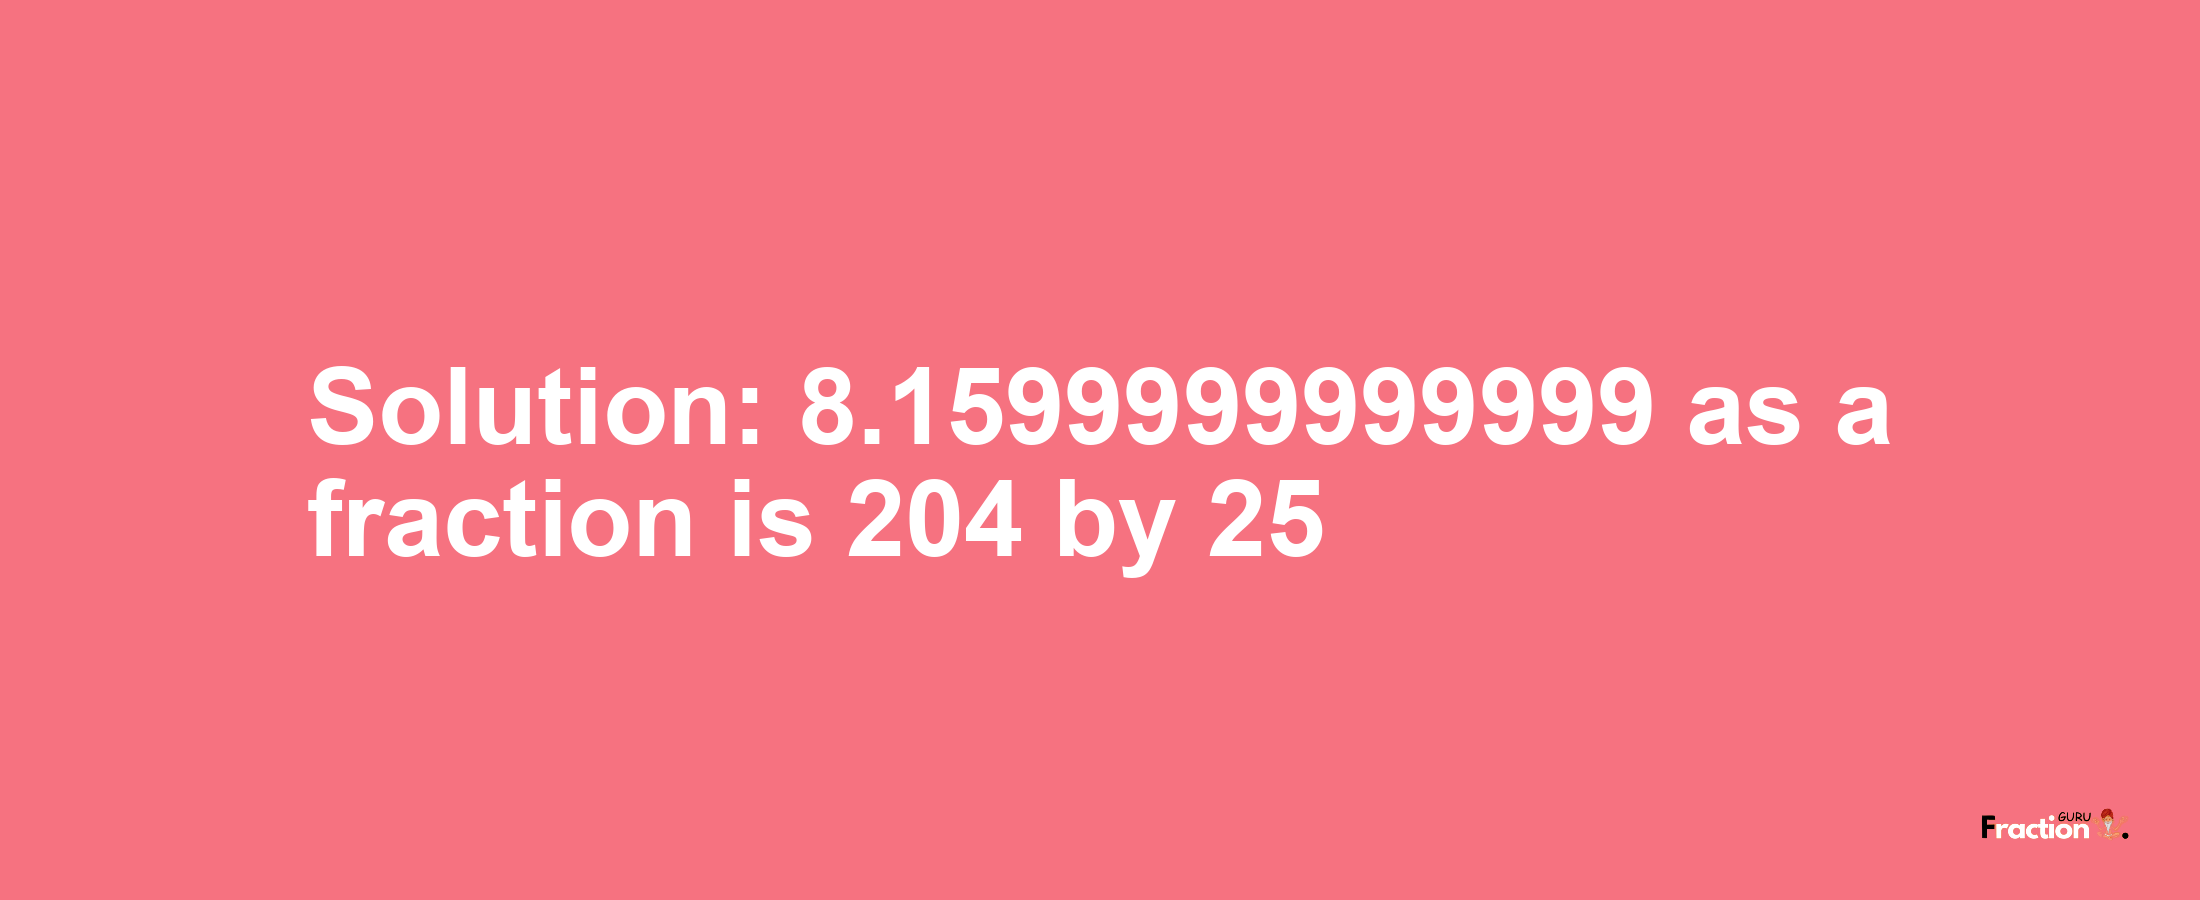 Solution:8.1599999999999 as a fraction is 204/25